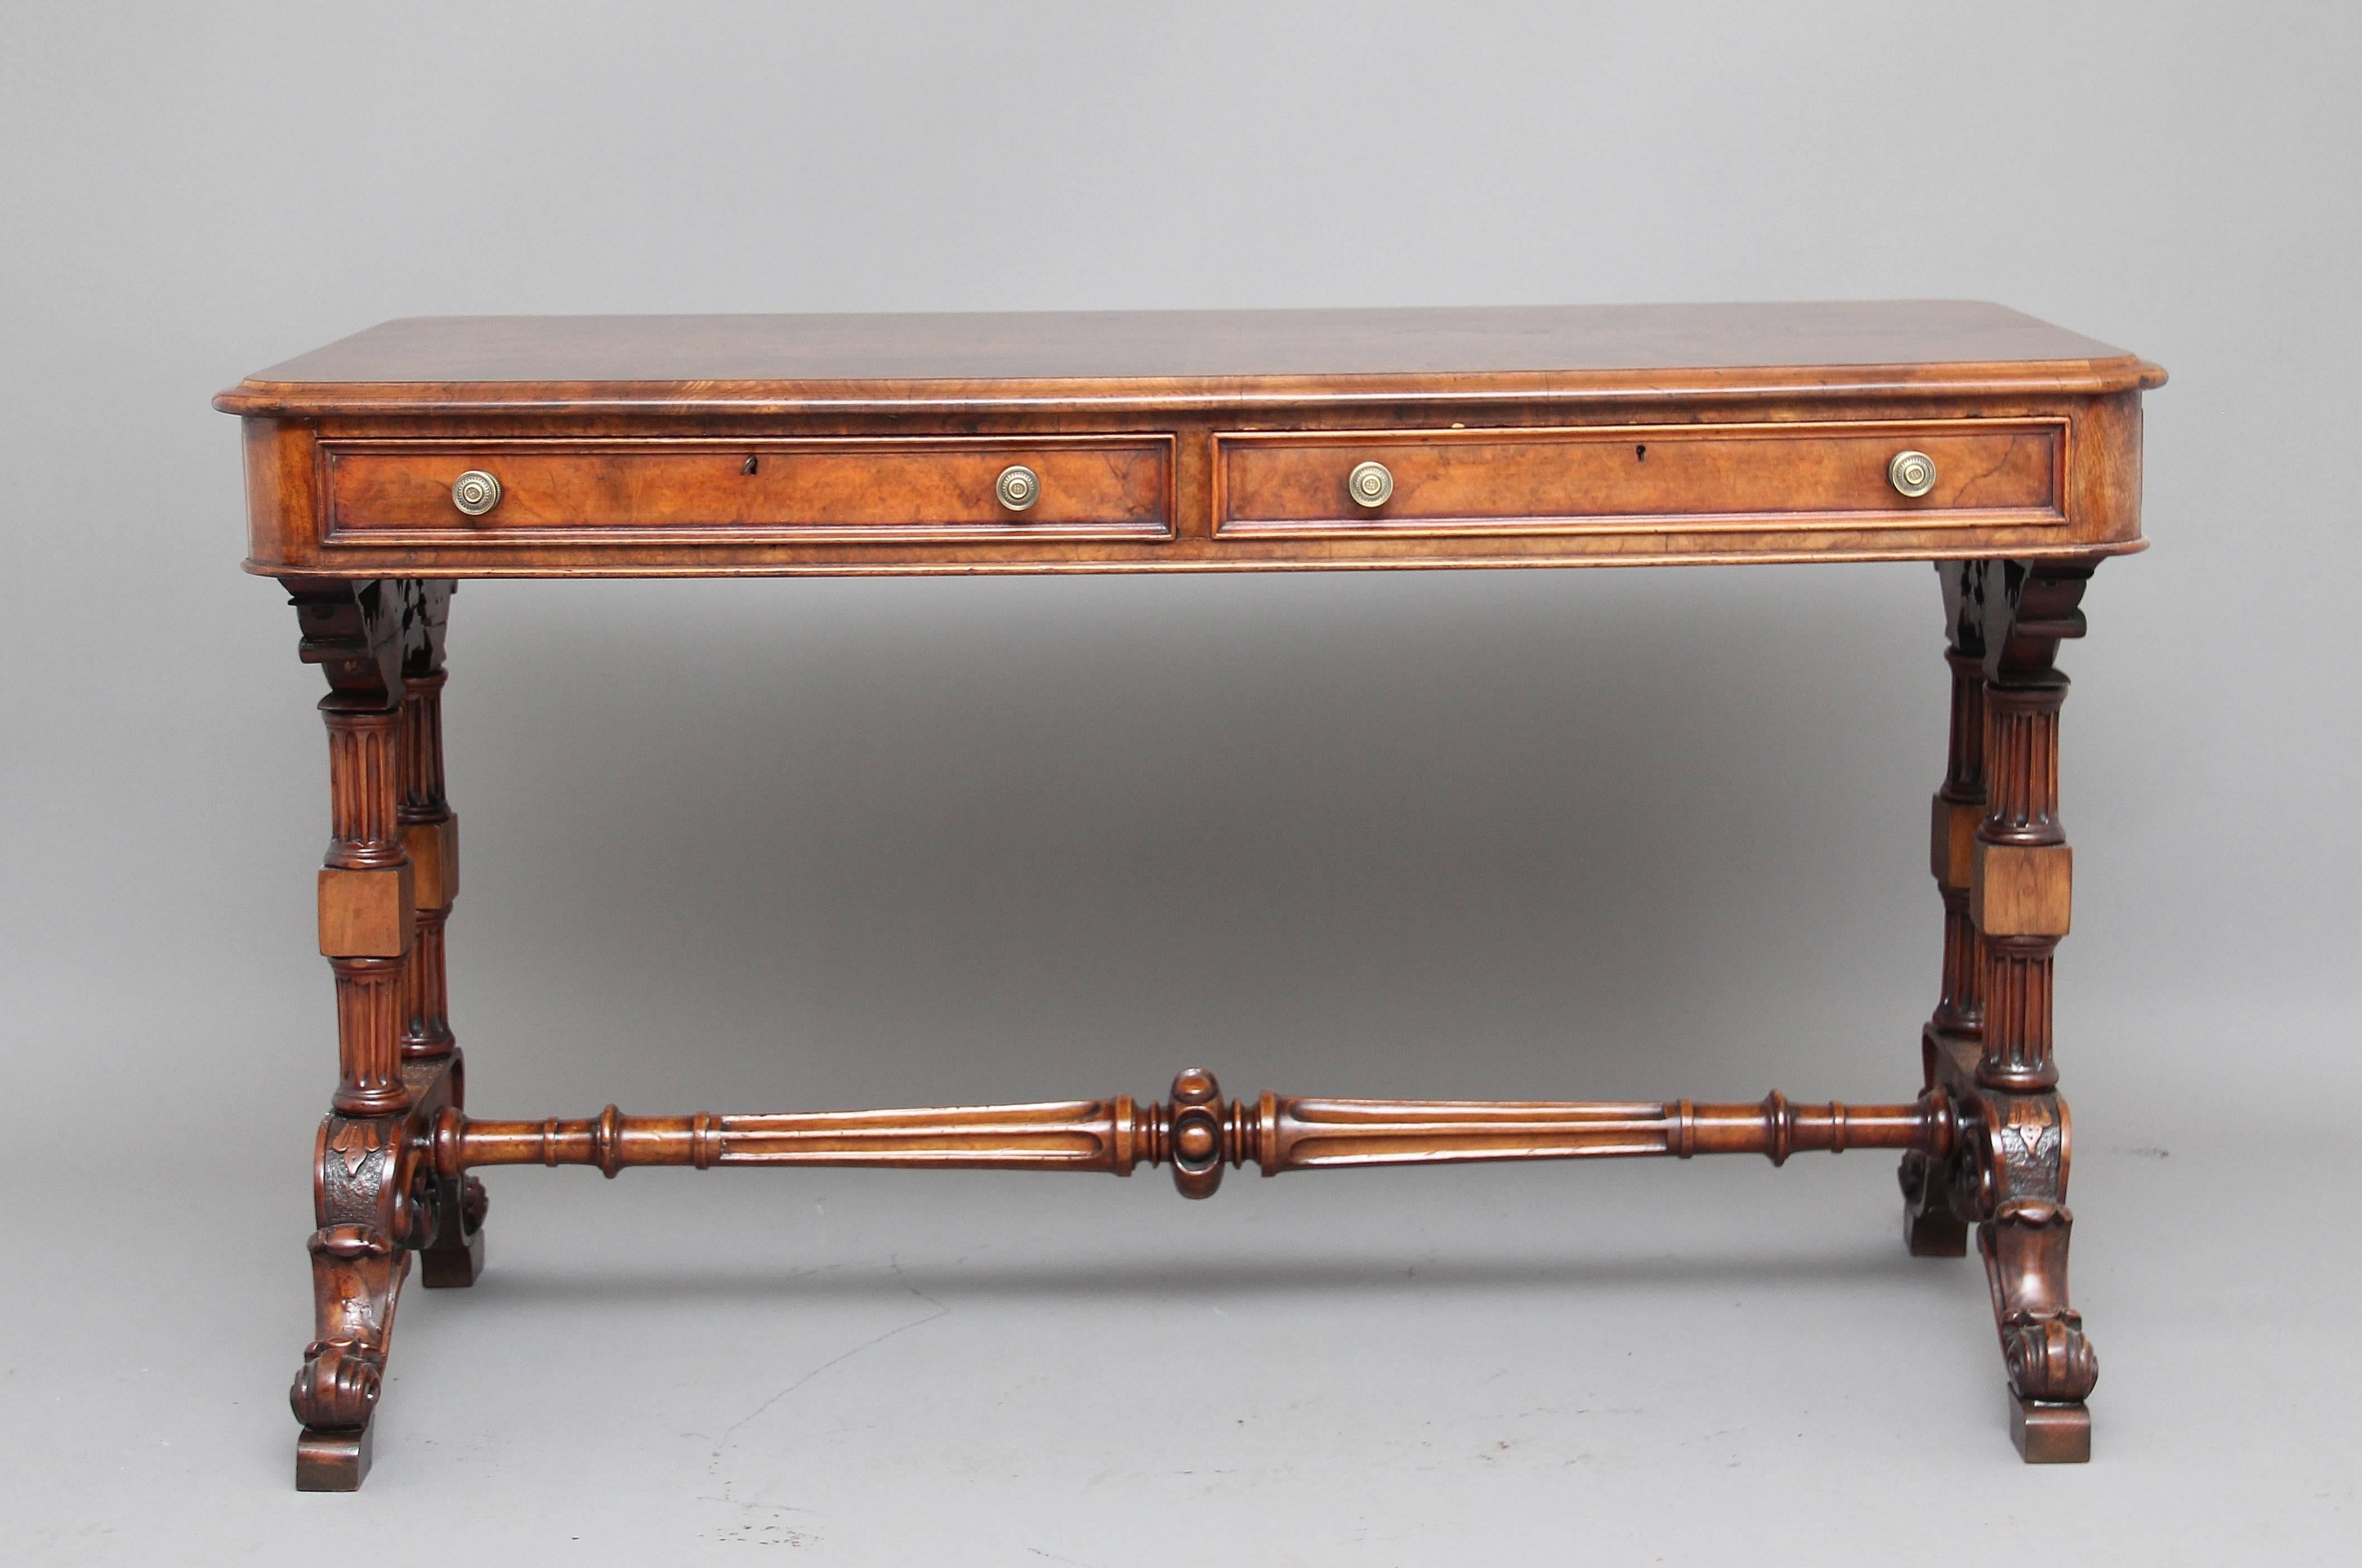 A fine quality 19th century walnut writing or sofa table with two drawers on the front and two dummy drawers on the back so the table can be freestanding in the middle of a room, the right hand drawer contains an adjustable leather writing slope